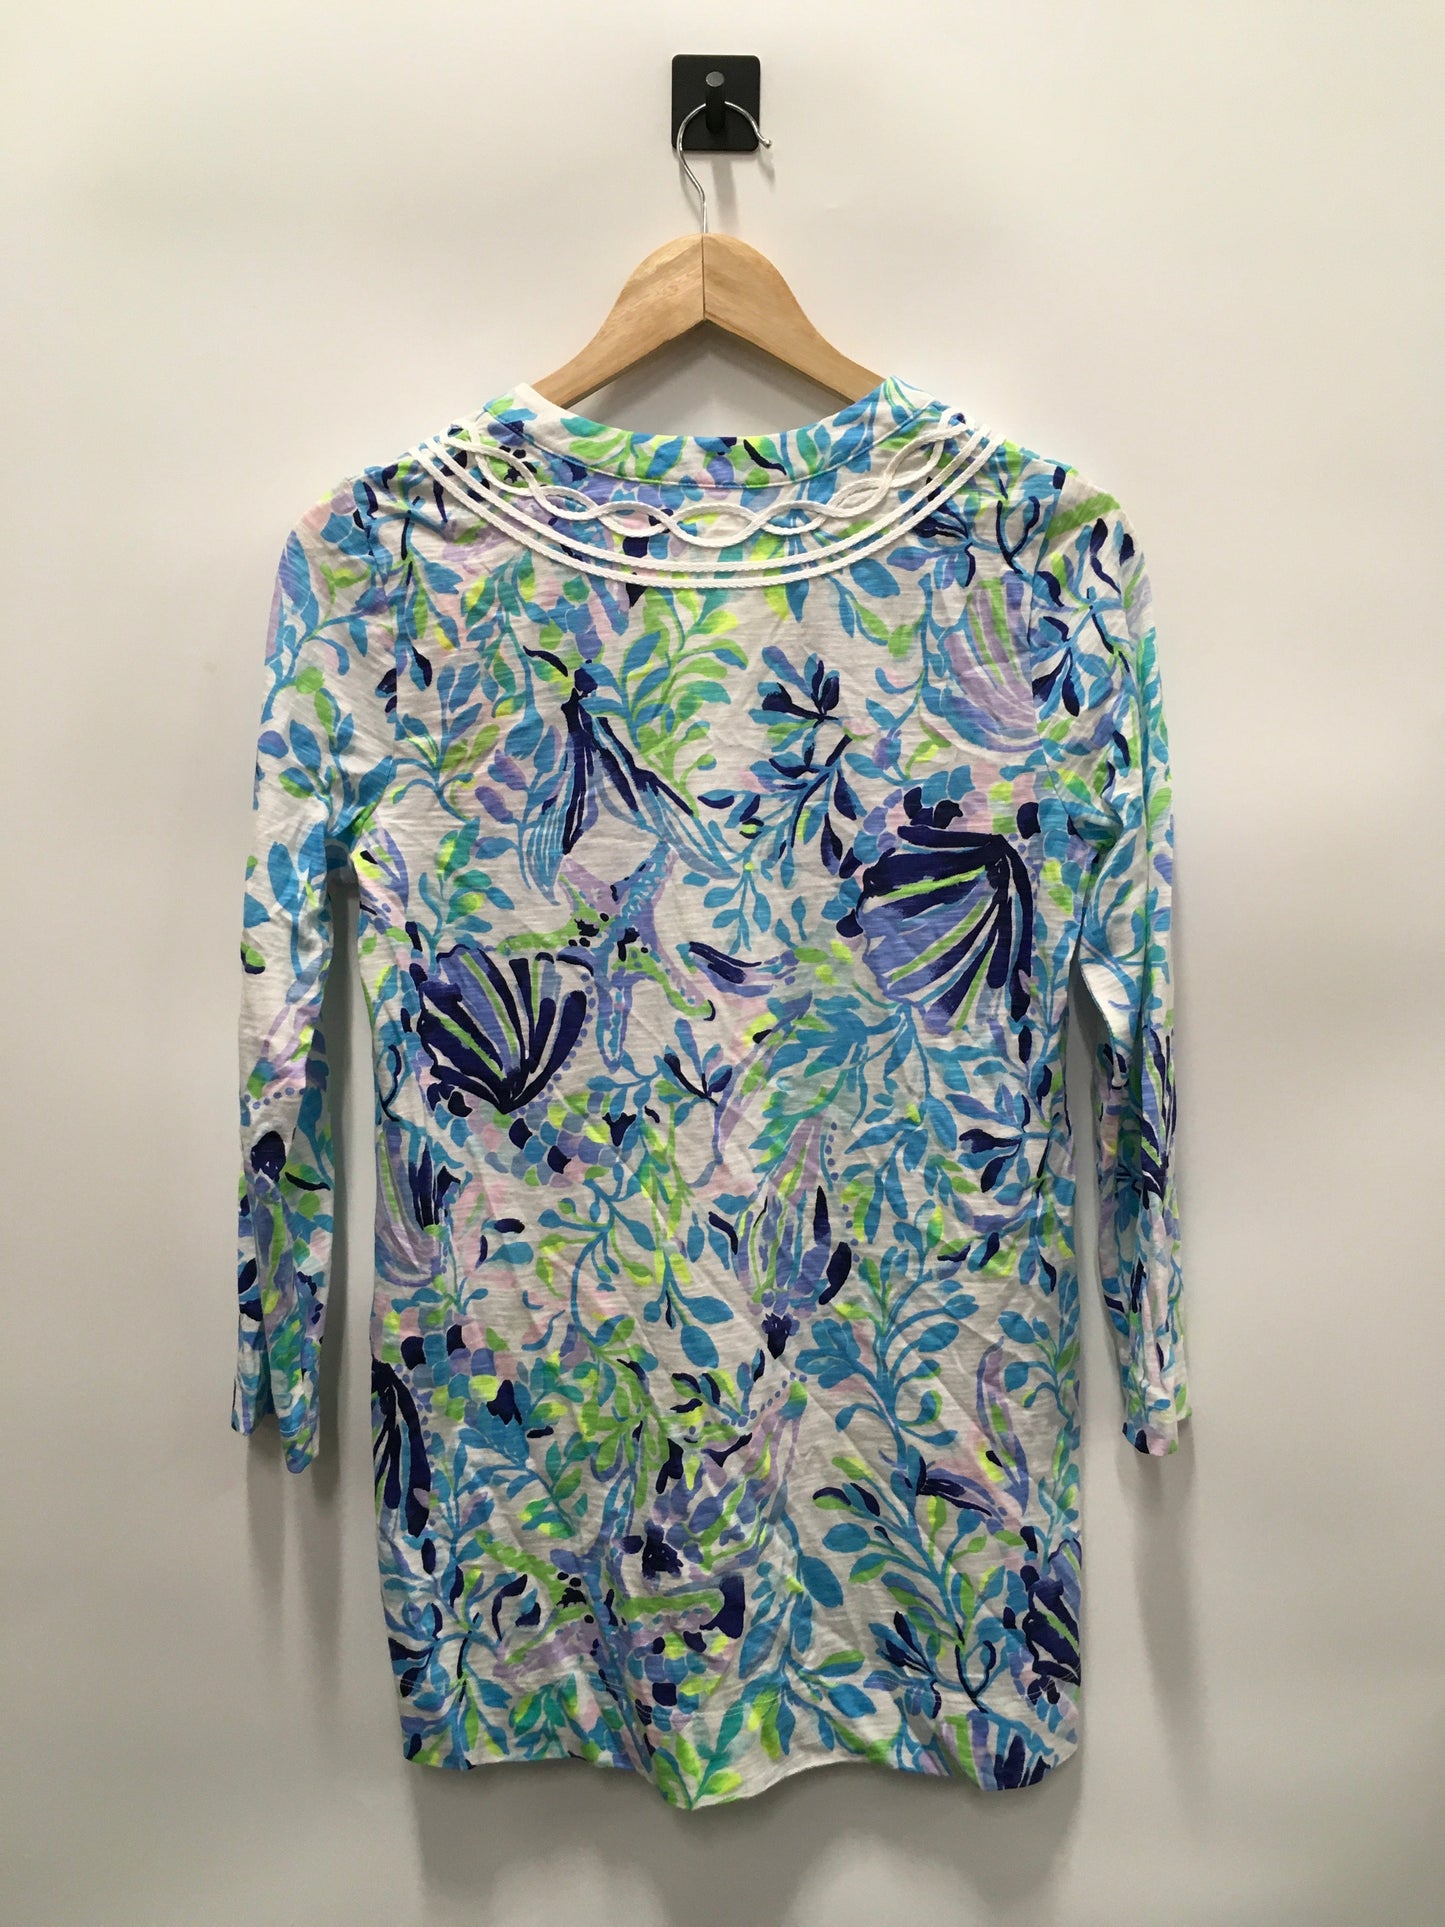 Blue & Green Top Long Sleeve Lilly Pulitzer, Size S